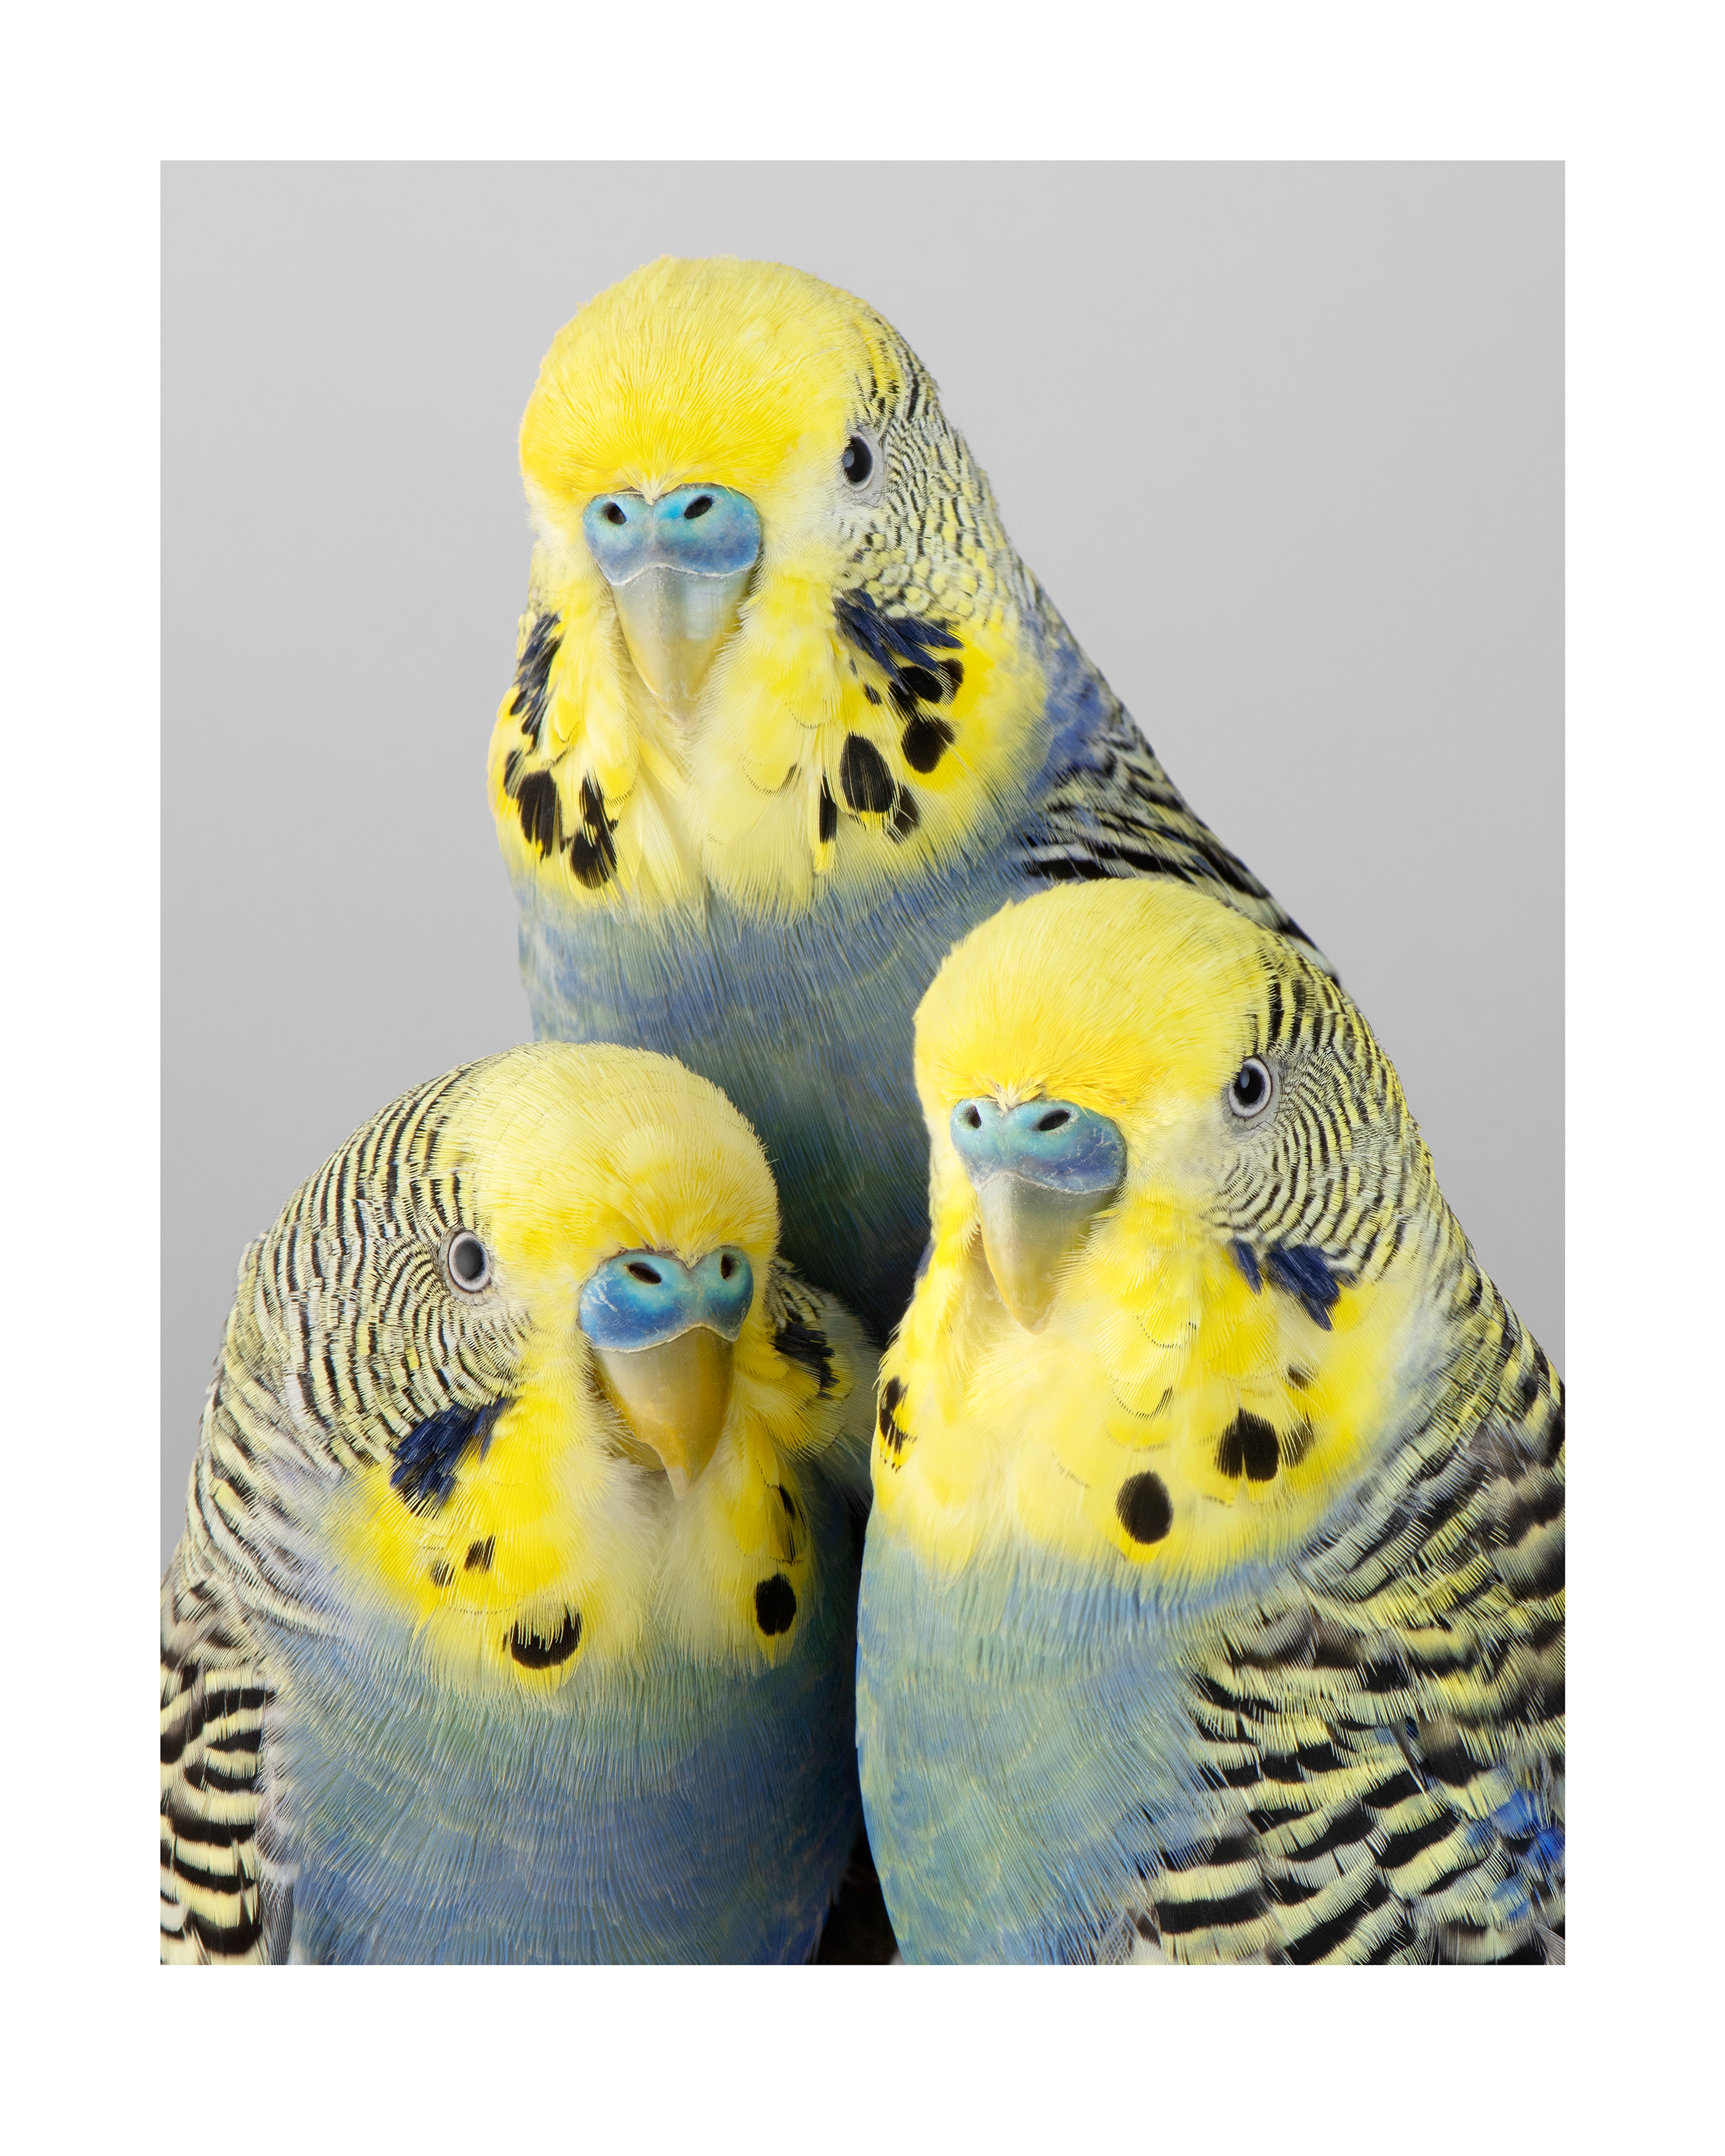 A photograph of a trio of yellow and blue birds